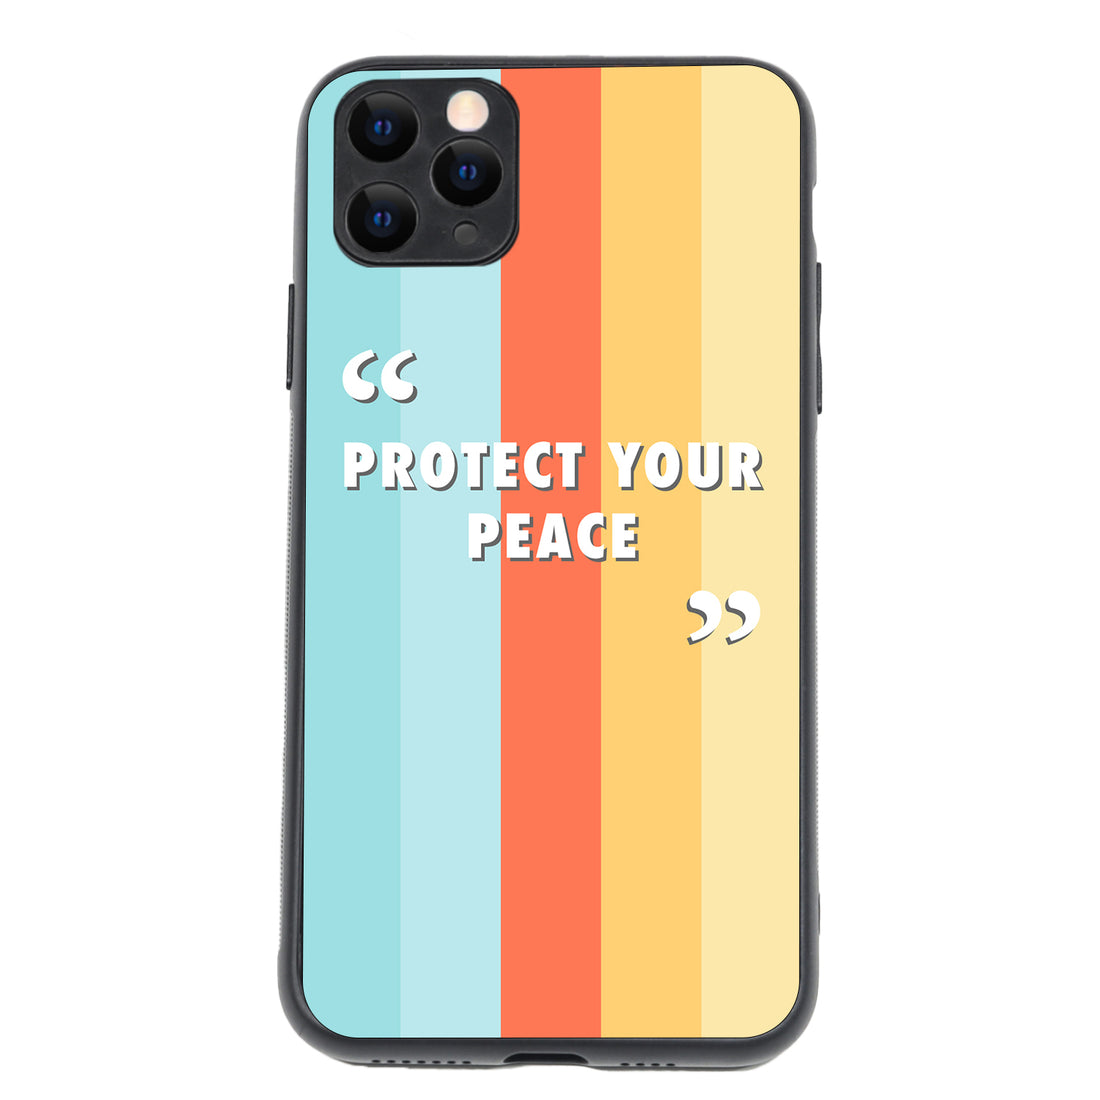 Protect your peace Motivational Quotes iPhone 11 Pro Max Case